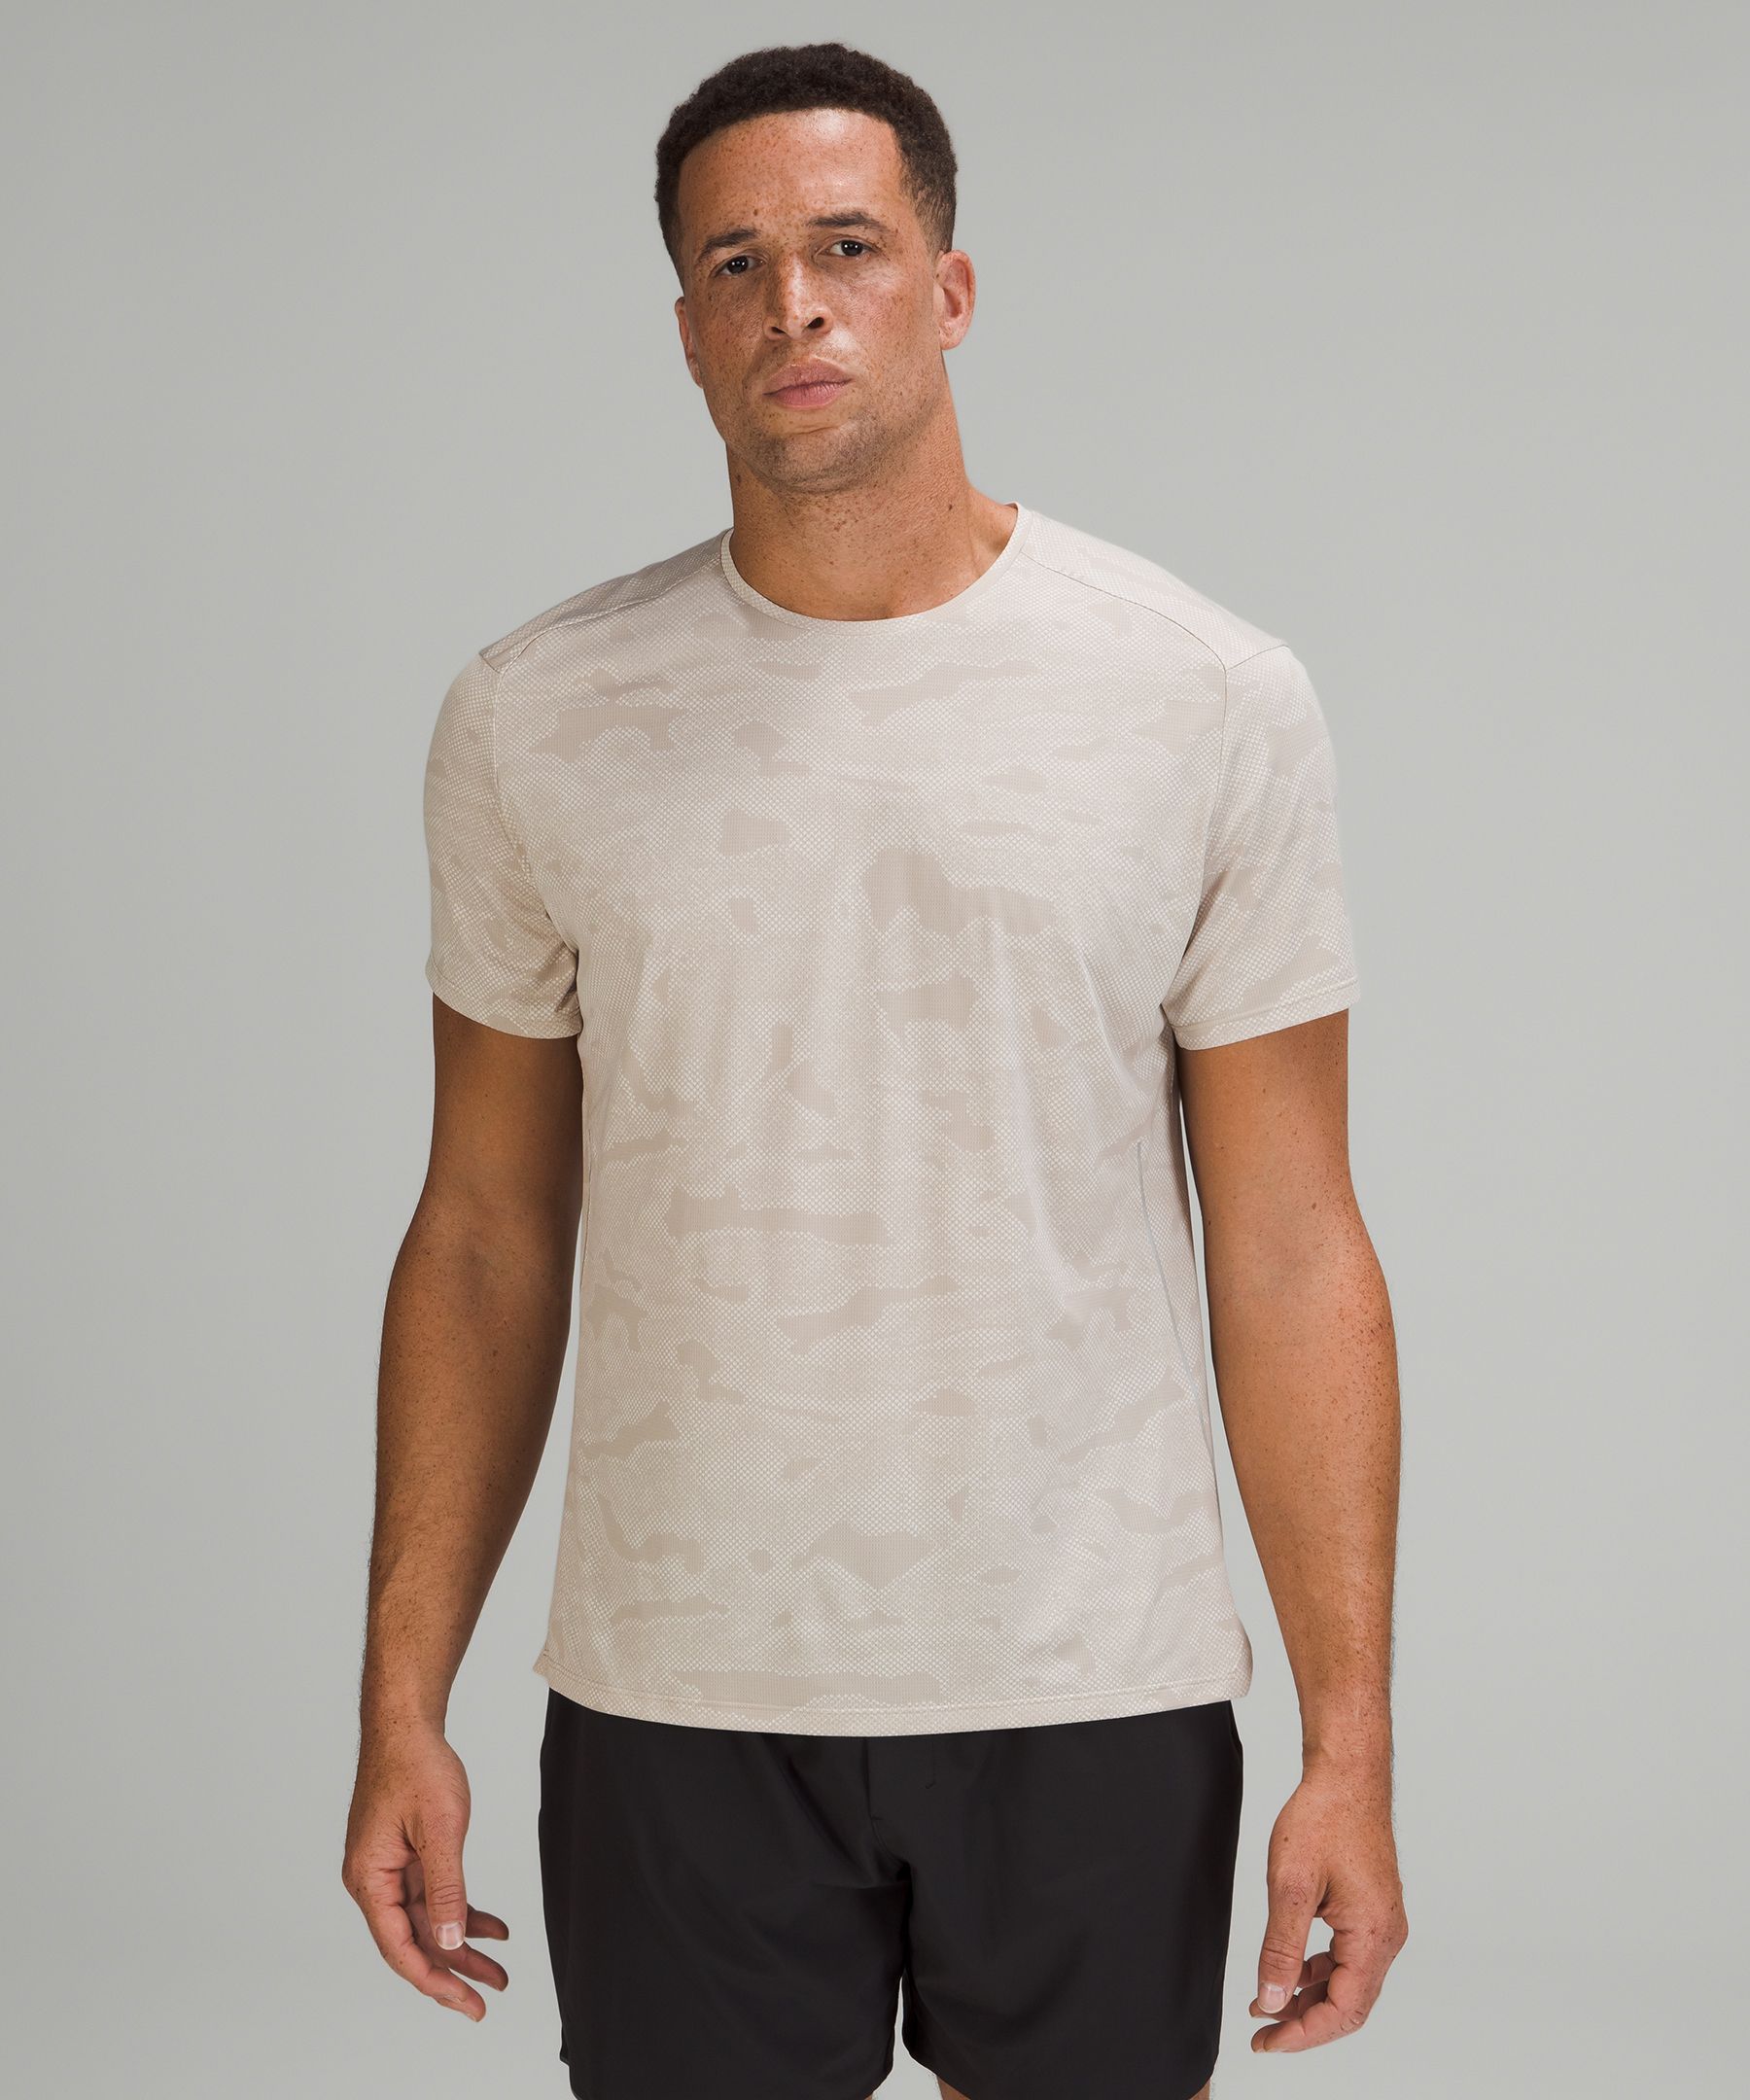 Lululemon Fast And Free Short Sleeve Shirt In Chroma Camo White Opal Raw Linen